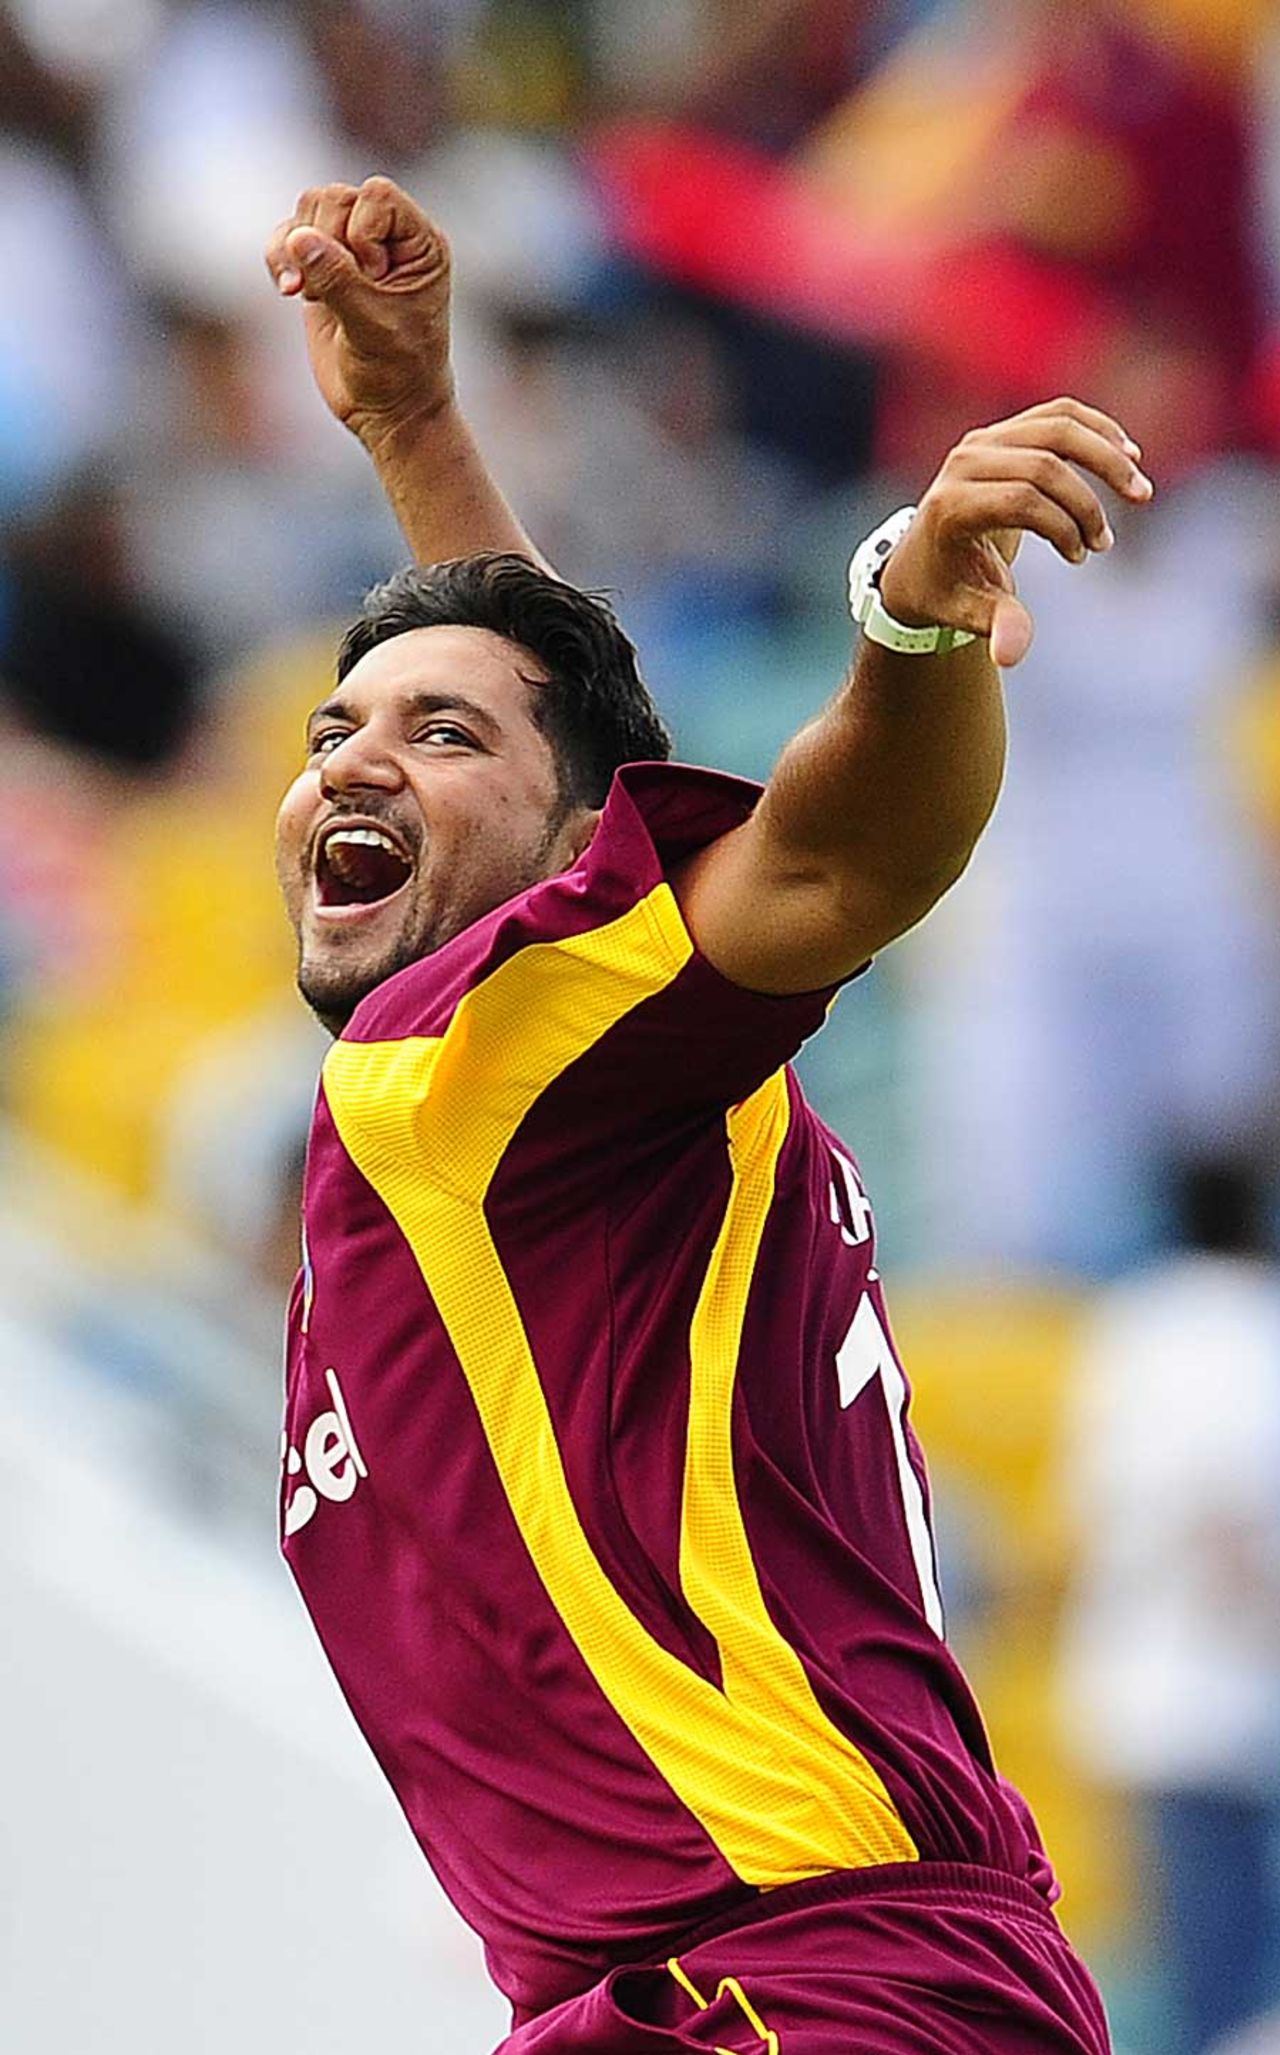 Ravi Rampaul bowled with pace and hostility, West Indies v Pakistan, 3rd ODI, Barbados, April 28, 2011